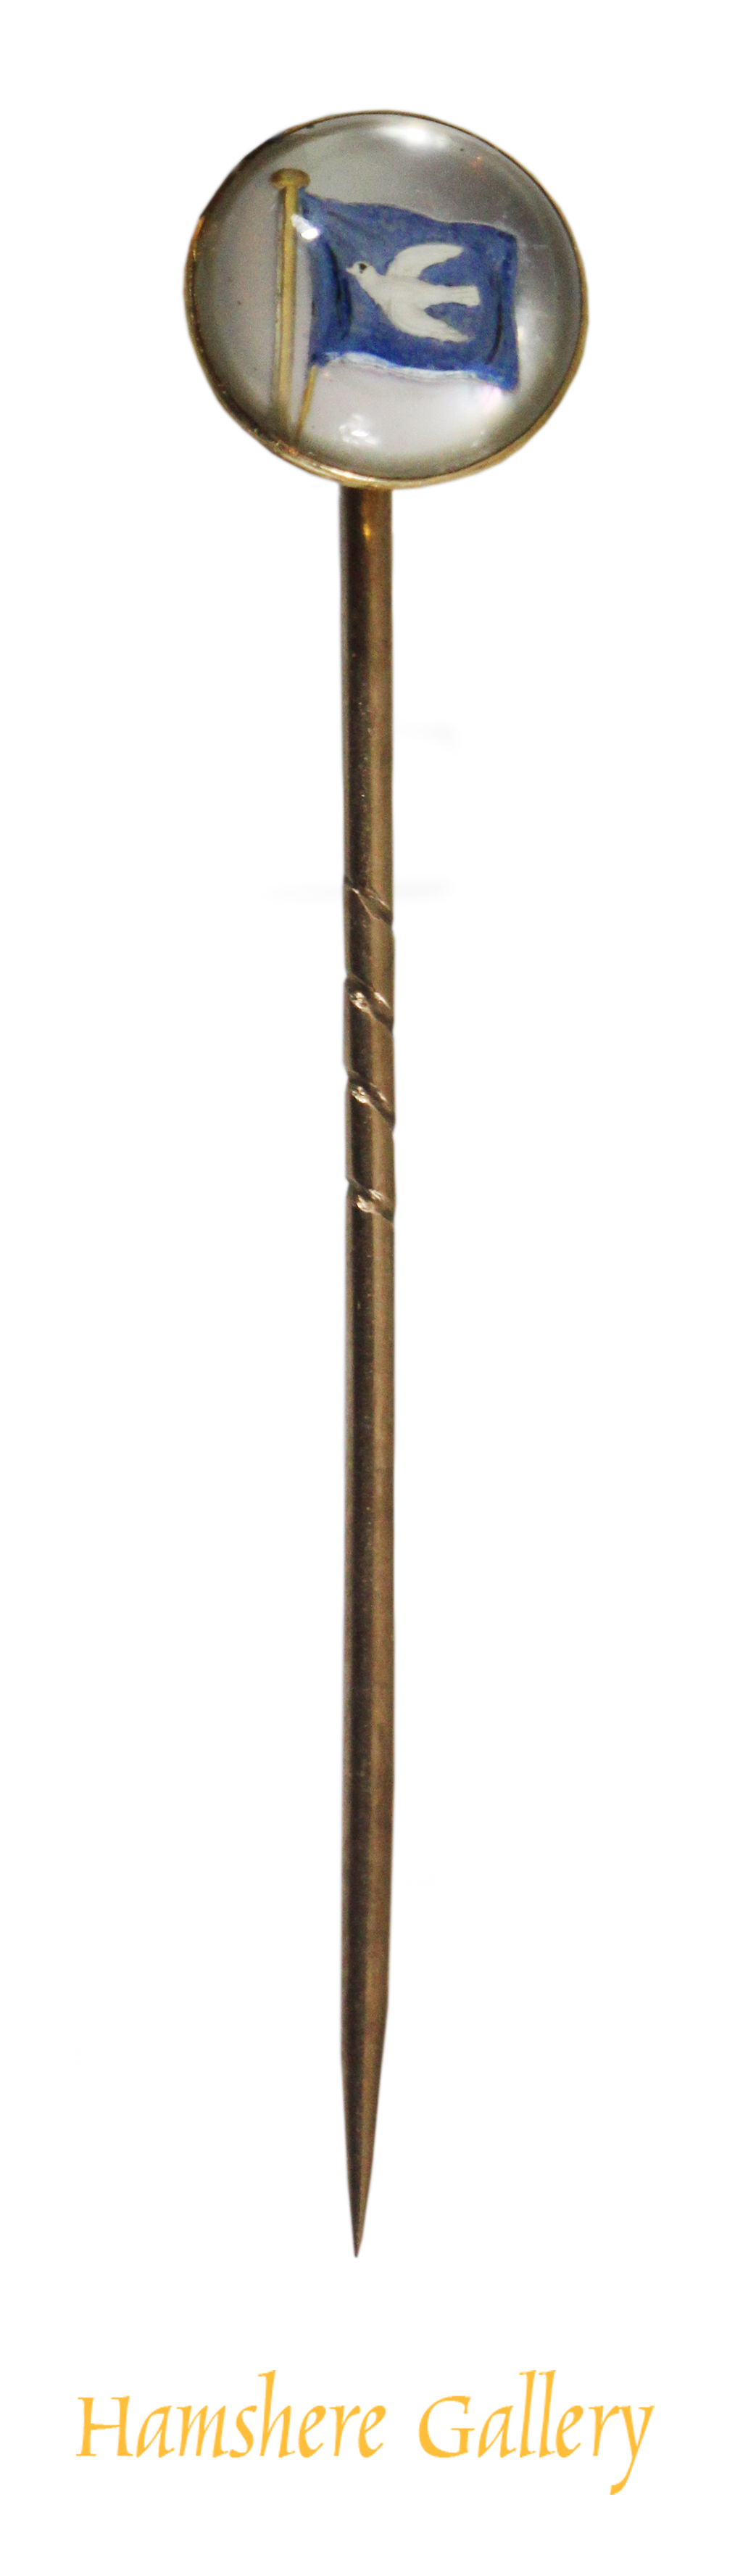 Click for larger image: A reverse intaglio crystal stick pin of a yachting ensign of a dove - A reverse intaglio crystal stick pin of a yachting ensign of a dove